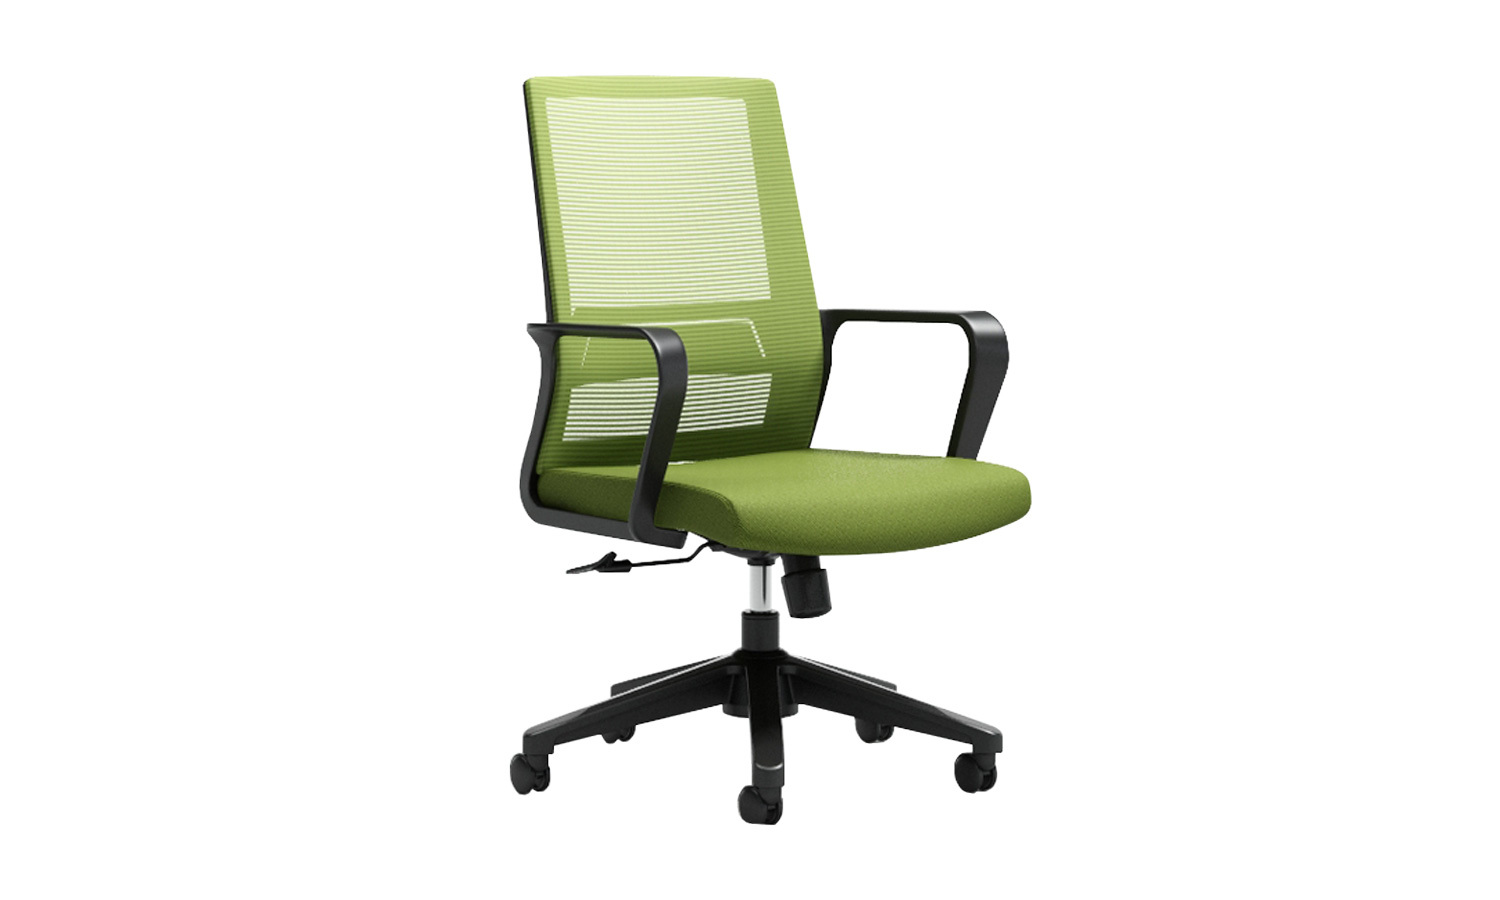 DX6934 task chair